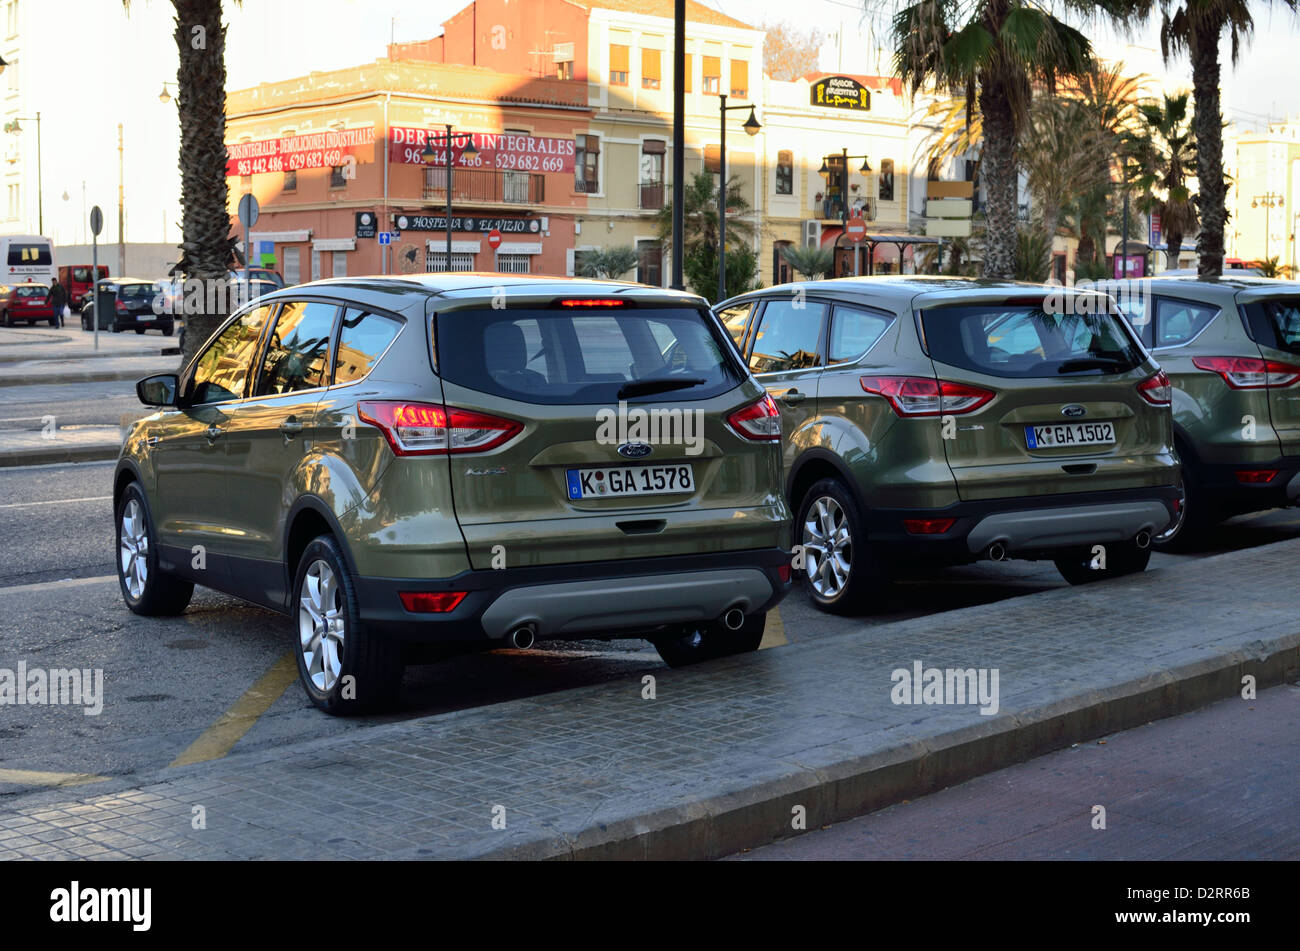 Ford Kuga II - MY 2013 - Popular compact SUV (sport utility vehicle) - during presentation in Valencia, Spain (January, 2013) Stock Photo